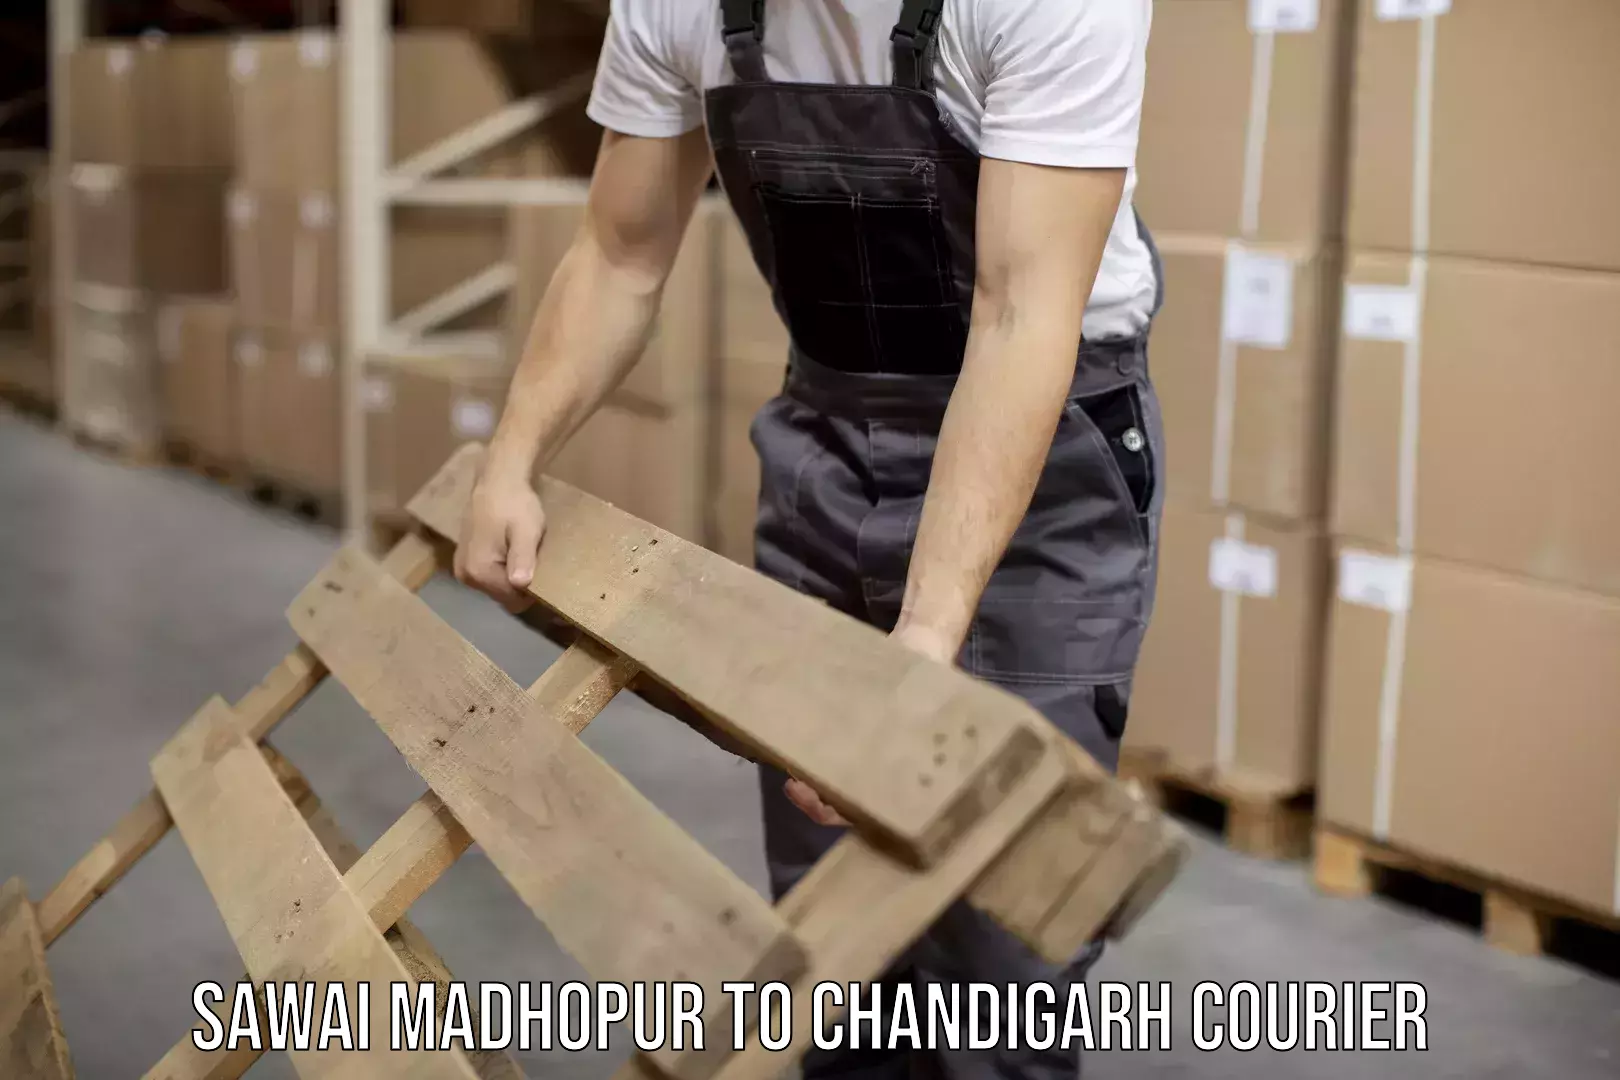 Full-service courier options Sawai Madhopur to Chandigarh